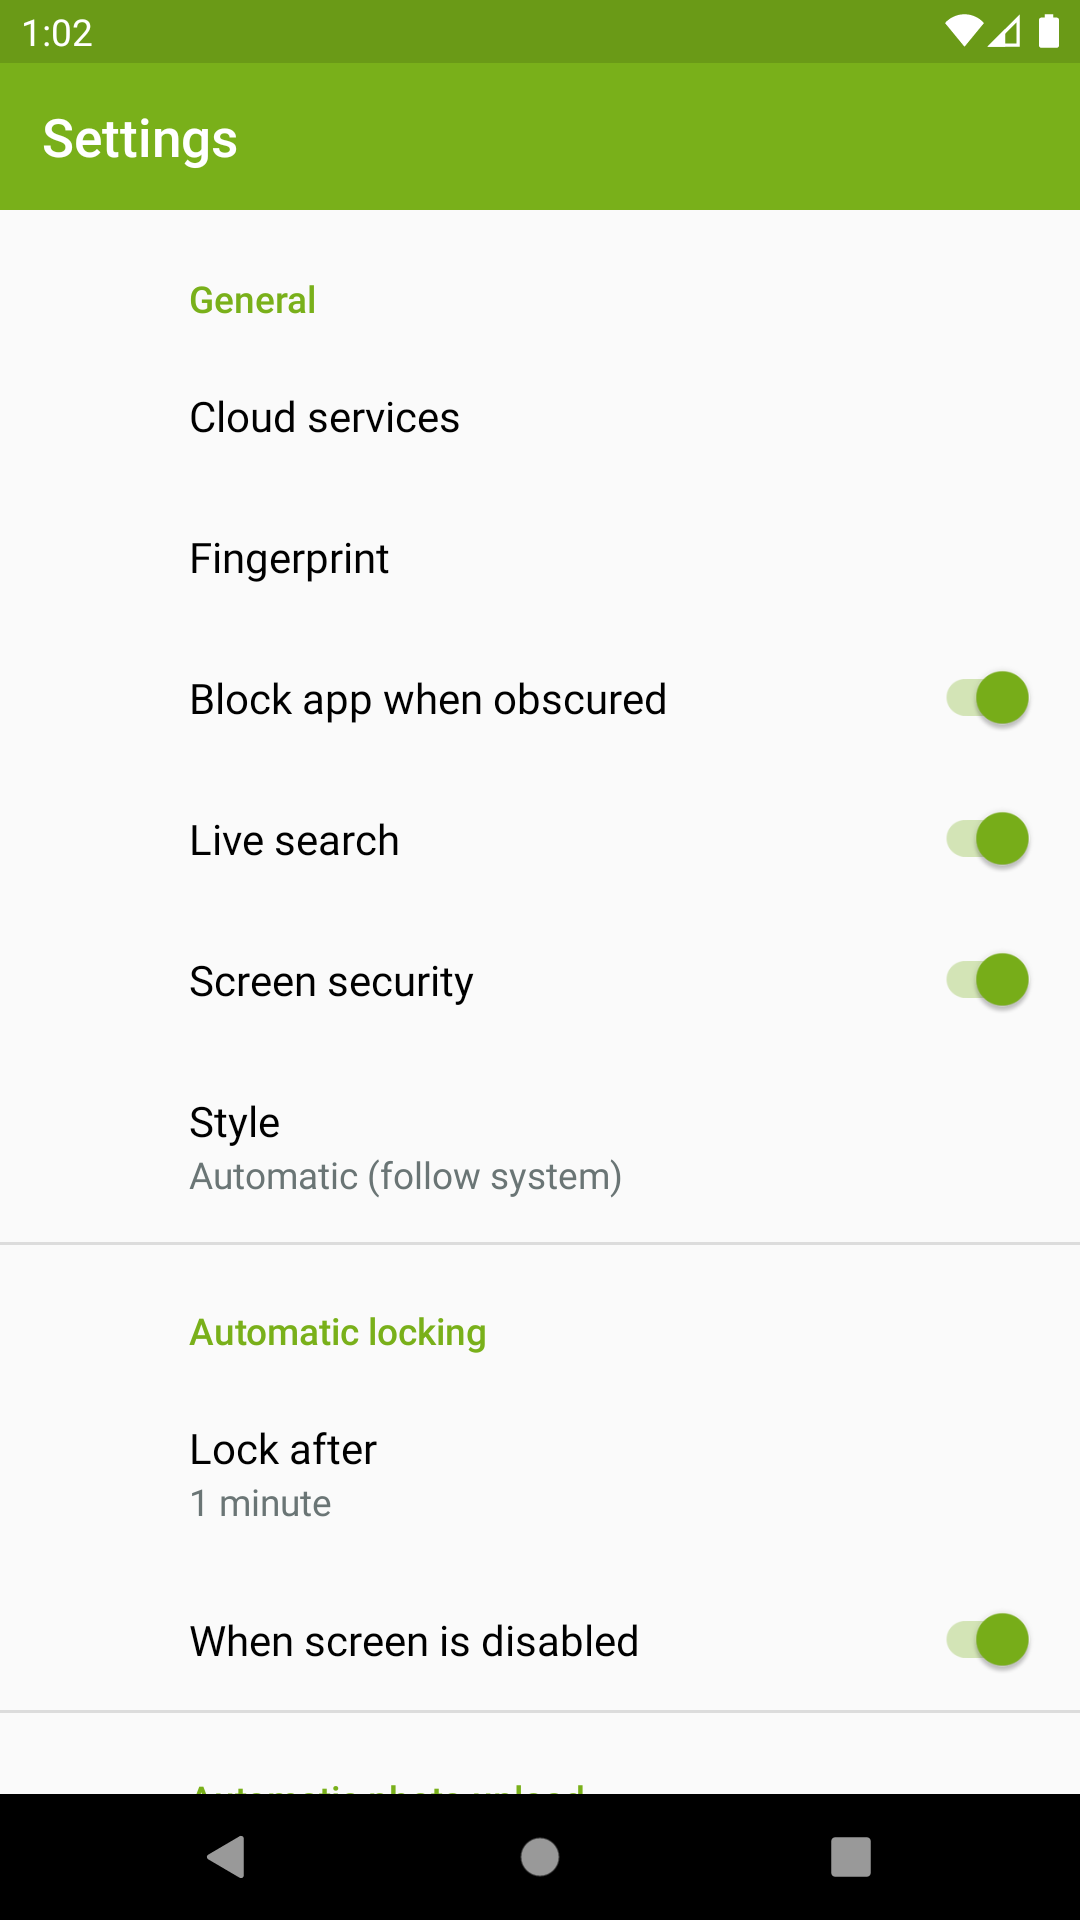 How to launch settings with Android